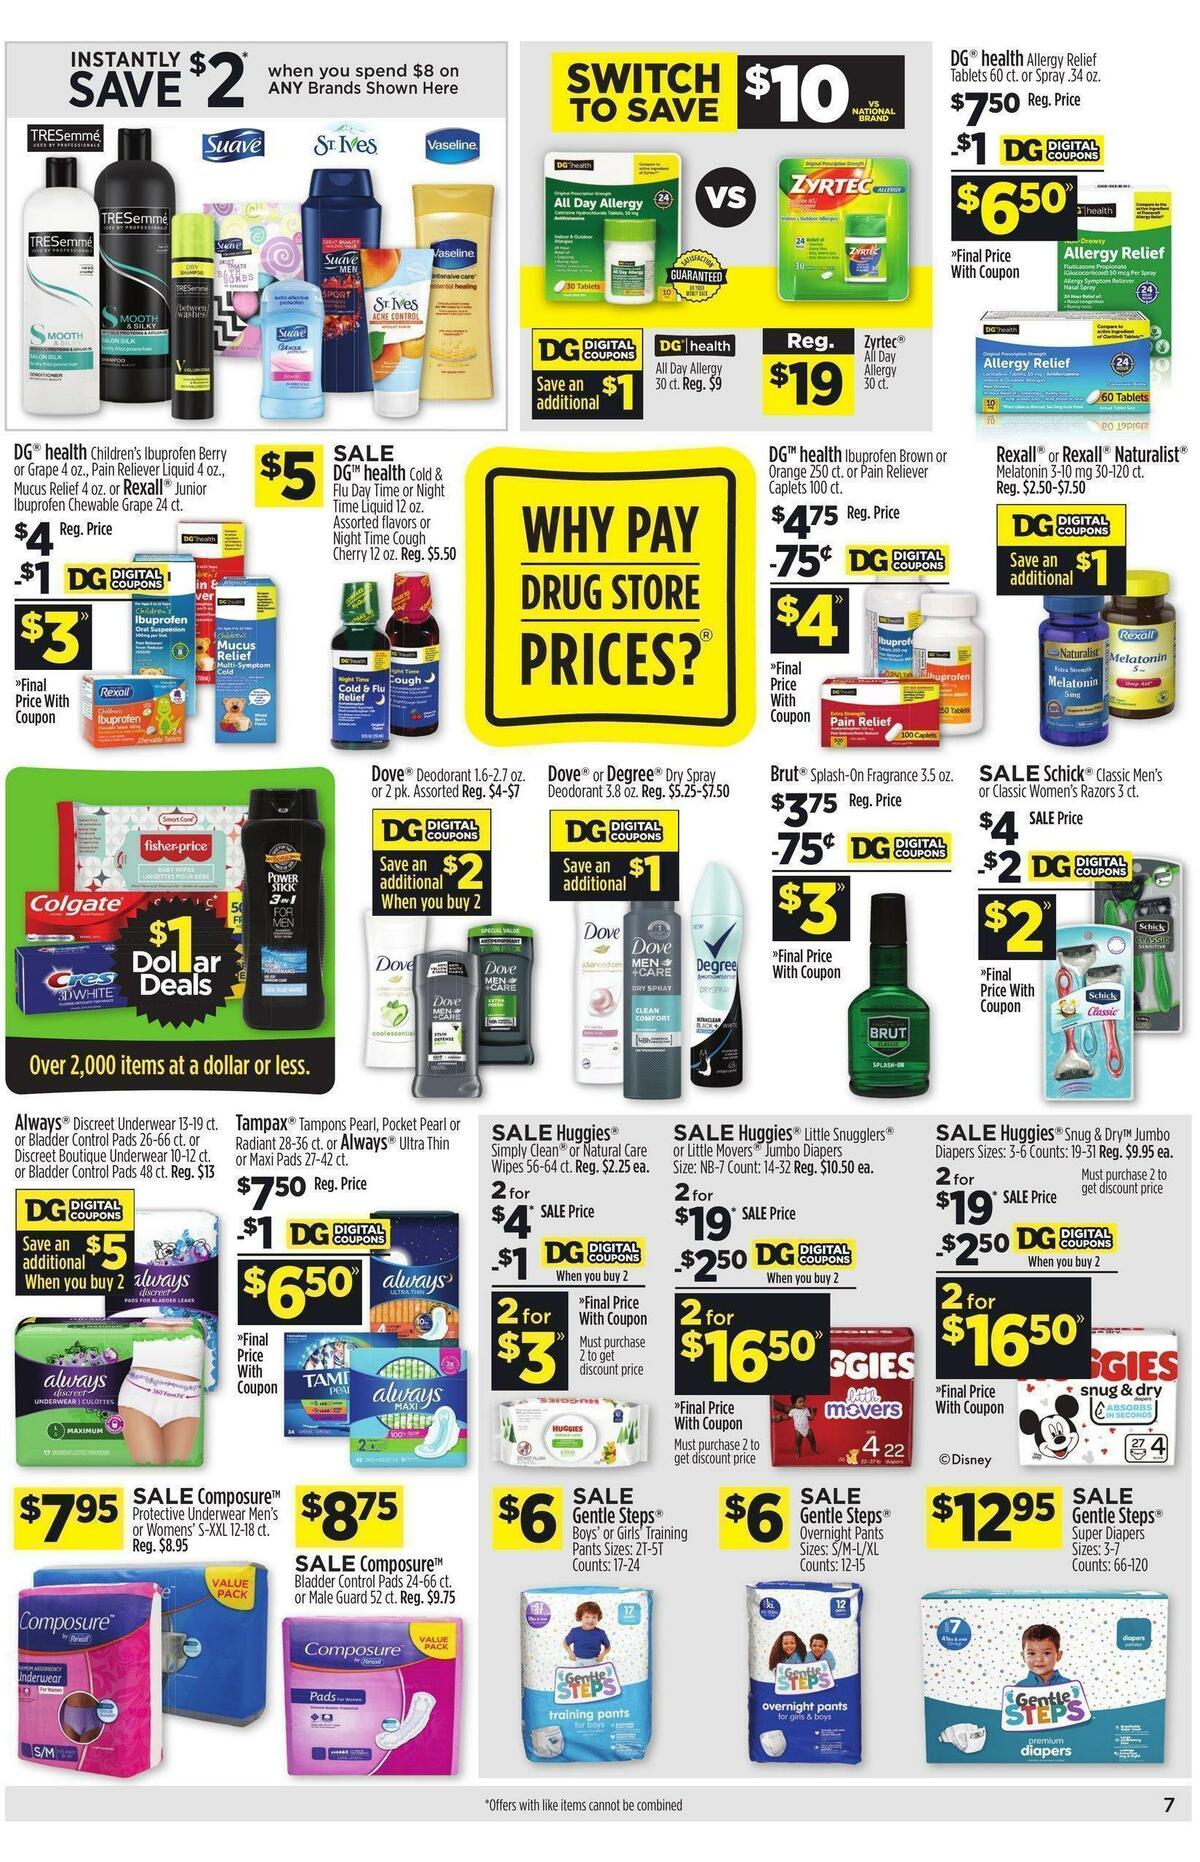 Dollar General Weekly Ad from February 27